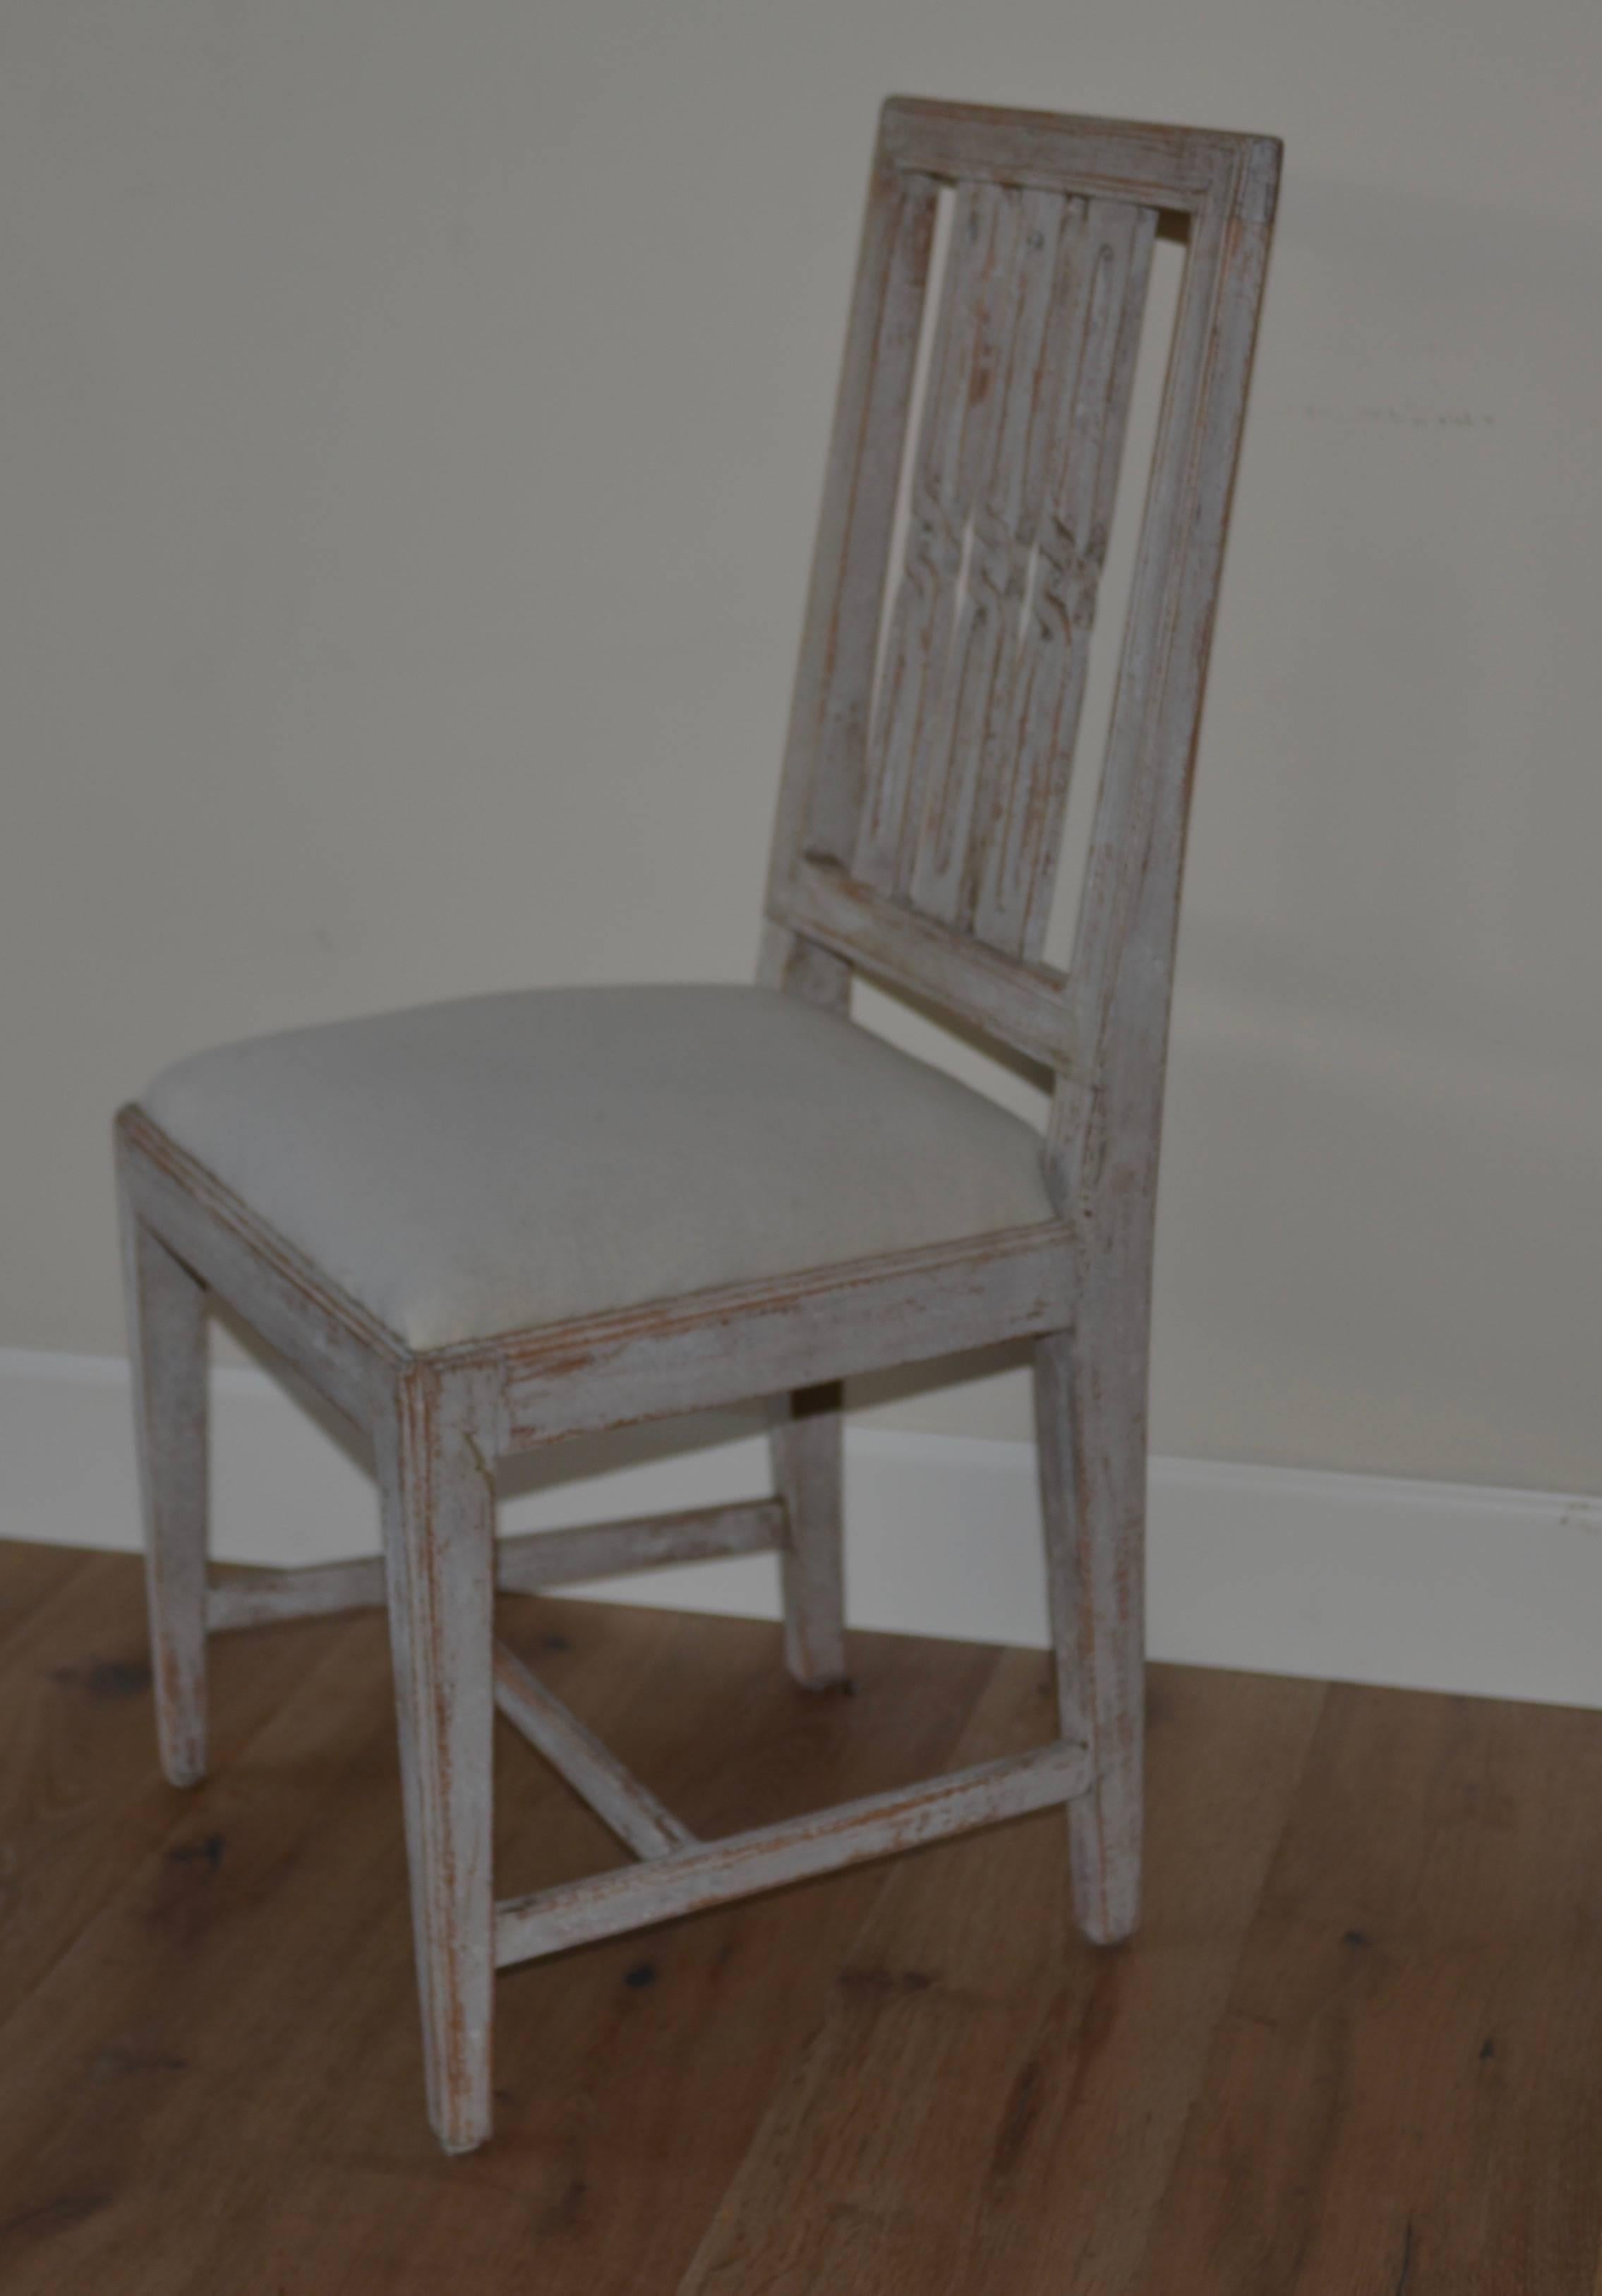 Swedish set of eight period Gustavian dining chairs scraped down to the original Swedish grey/blue finish. Lovely open work geometrical backs with simple tapered legs. Covered in Swedish muslin. Fully restored and sturdy.